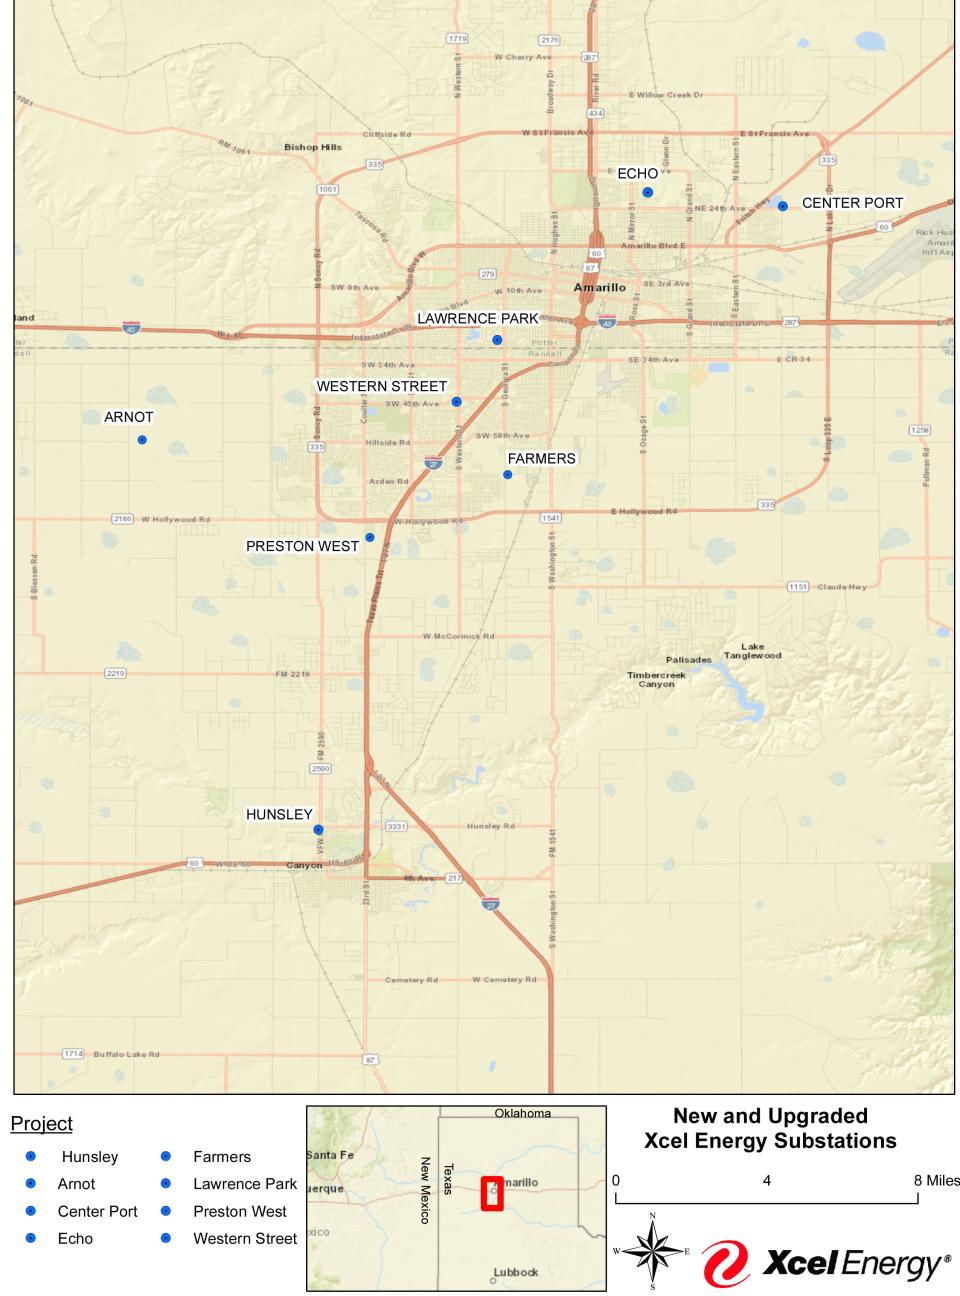 Map of new and upgraded Xcel Energy substations